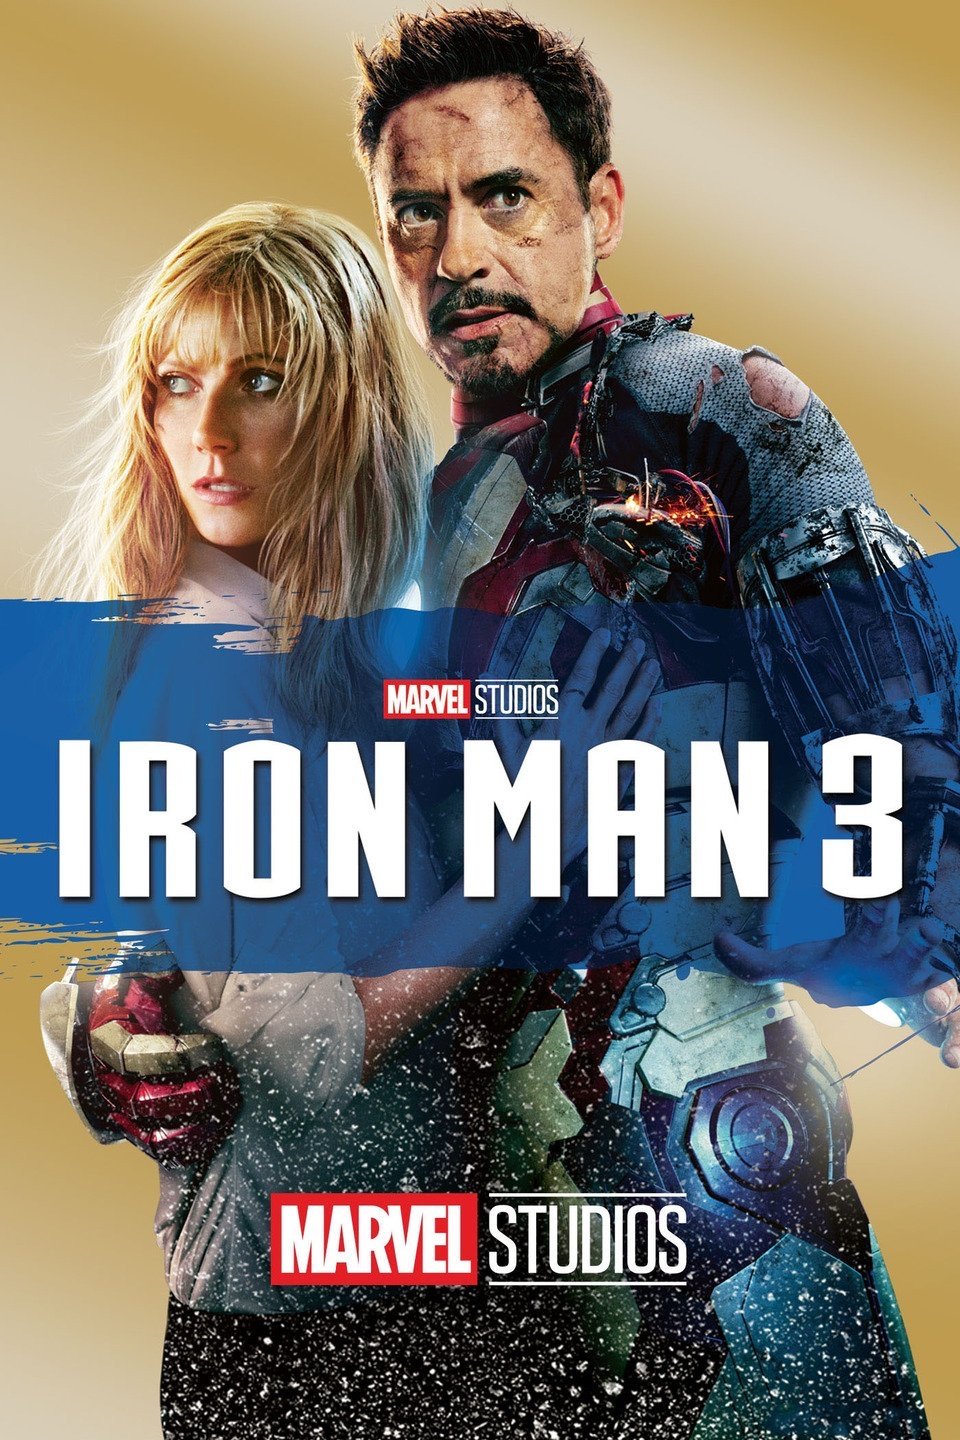 Iron Man 3 (2013) Vudu or Movies Anywhere HD redemption only